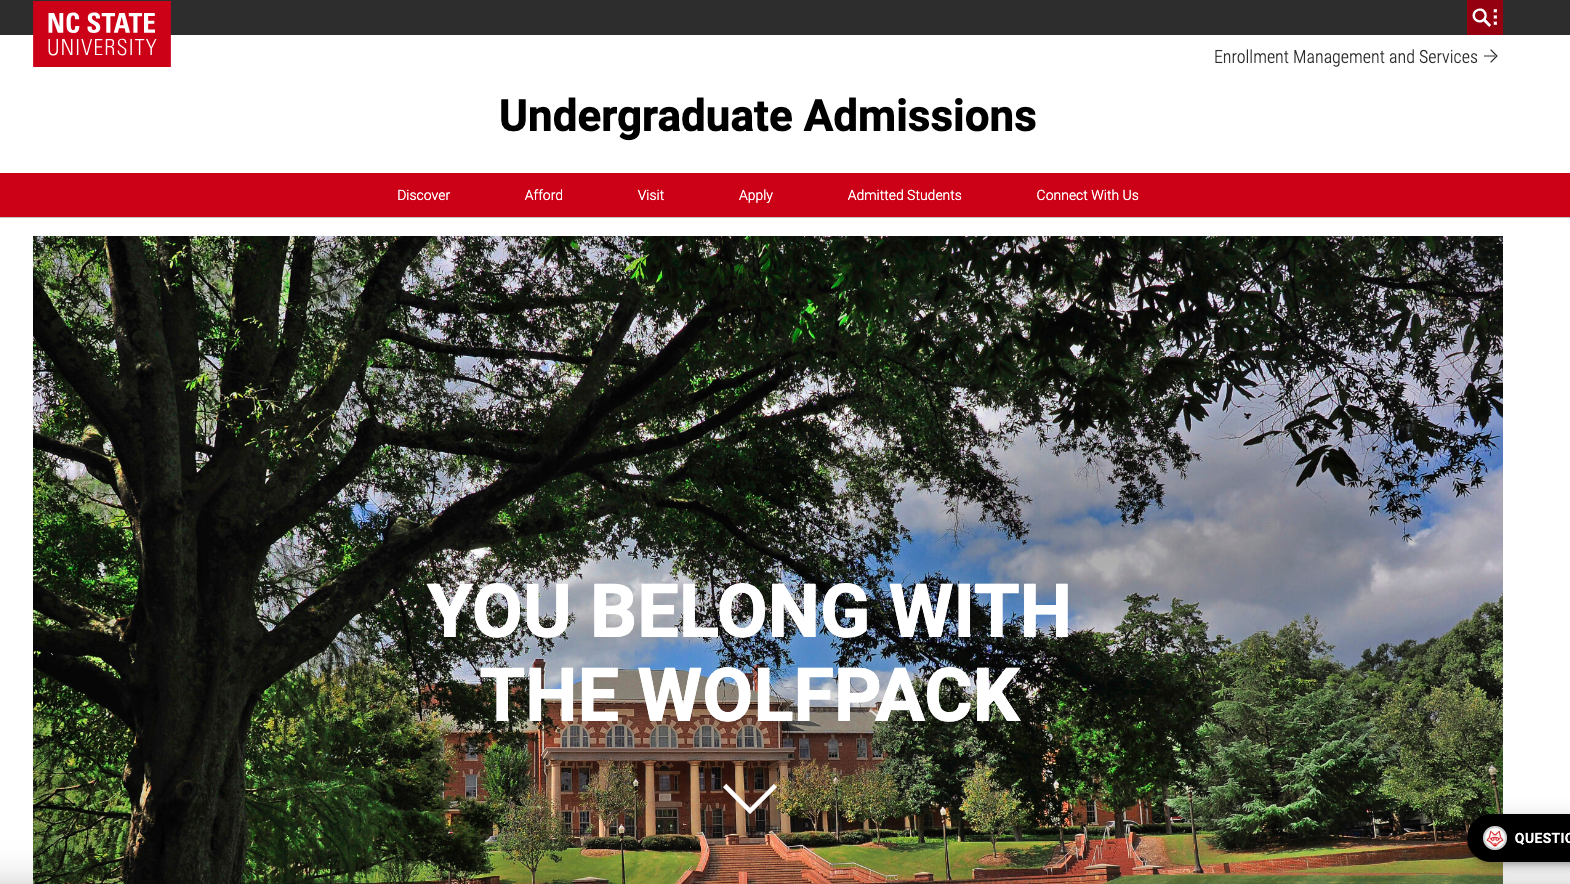 The homepage of NC State's Undergraduate Admissions website.